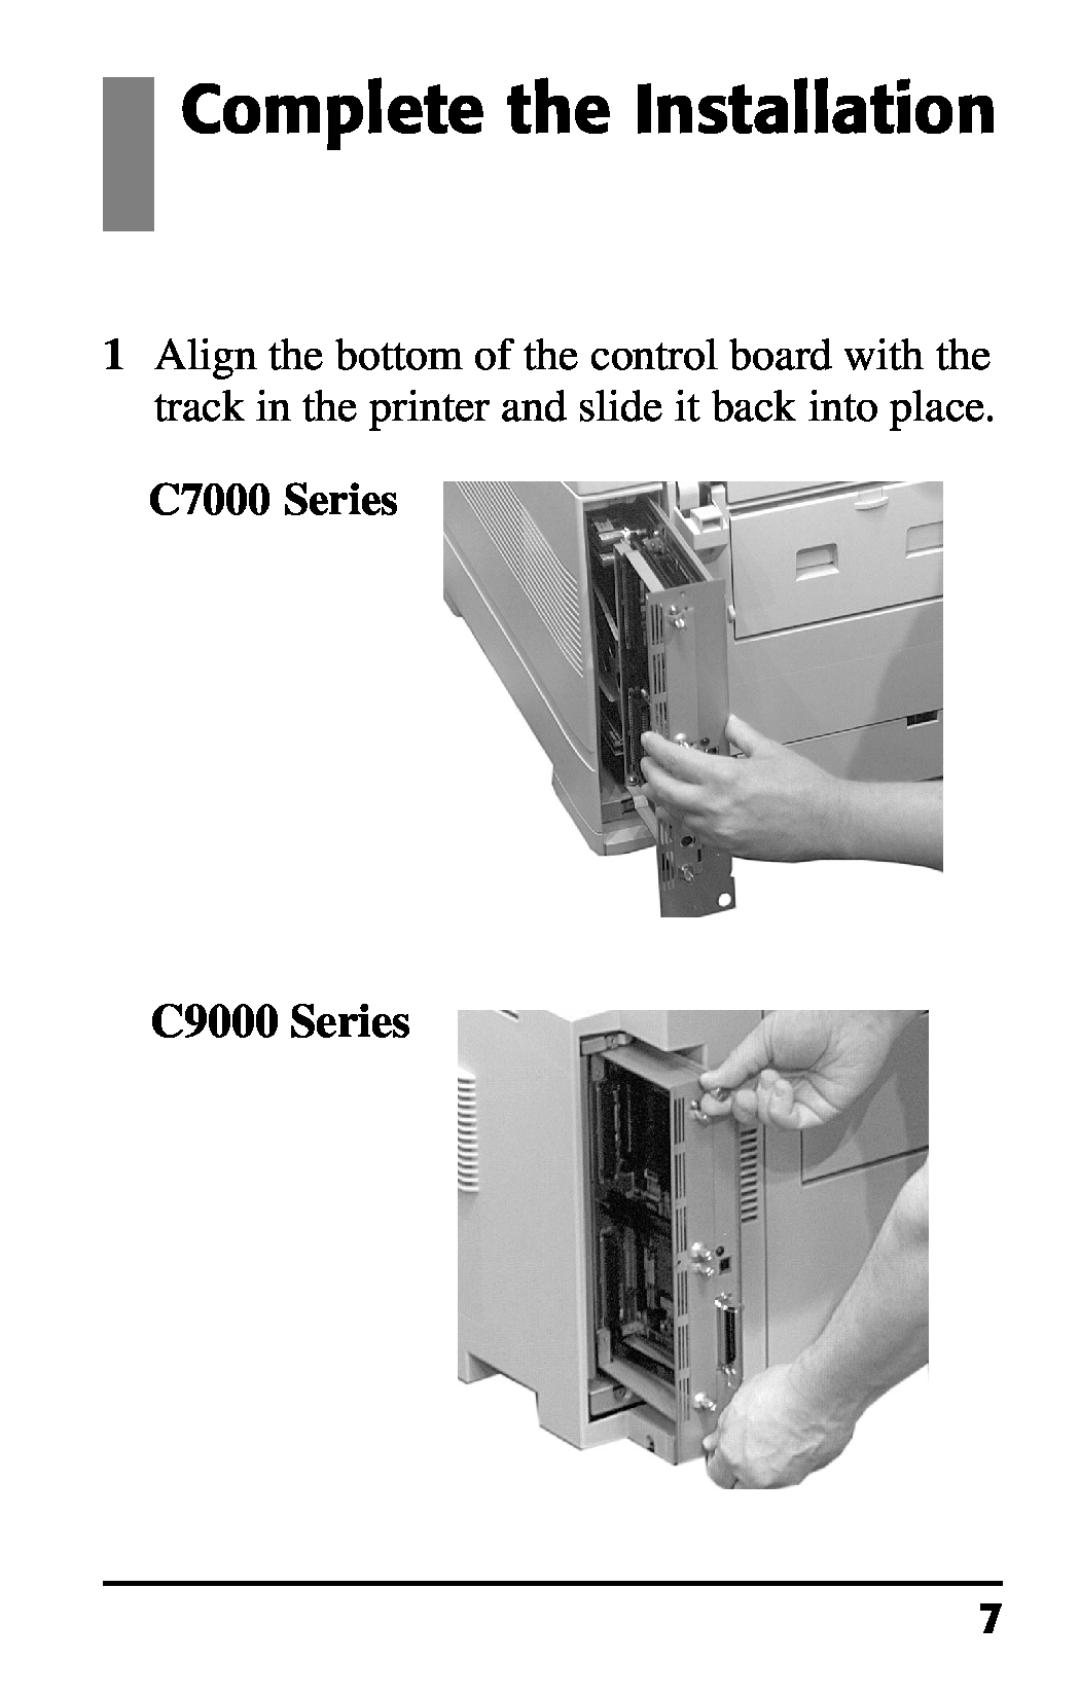 Oki 70037301 installation instructions Complete the Installation, C9000 Series 